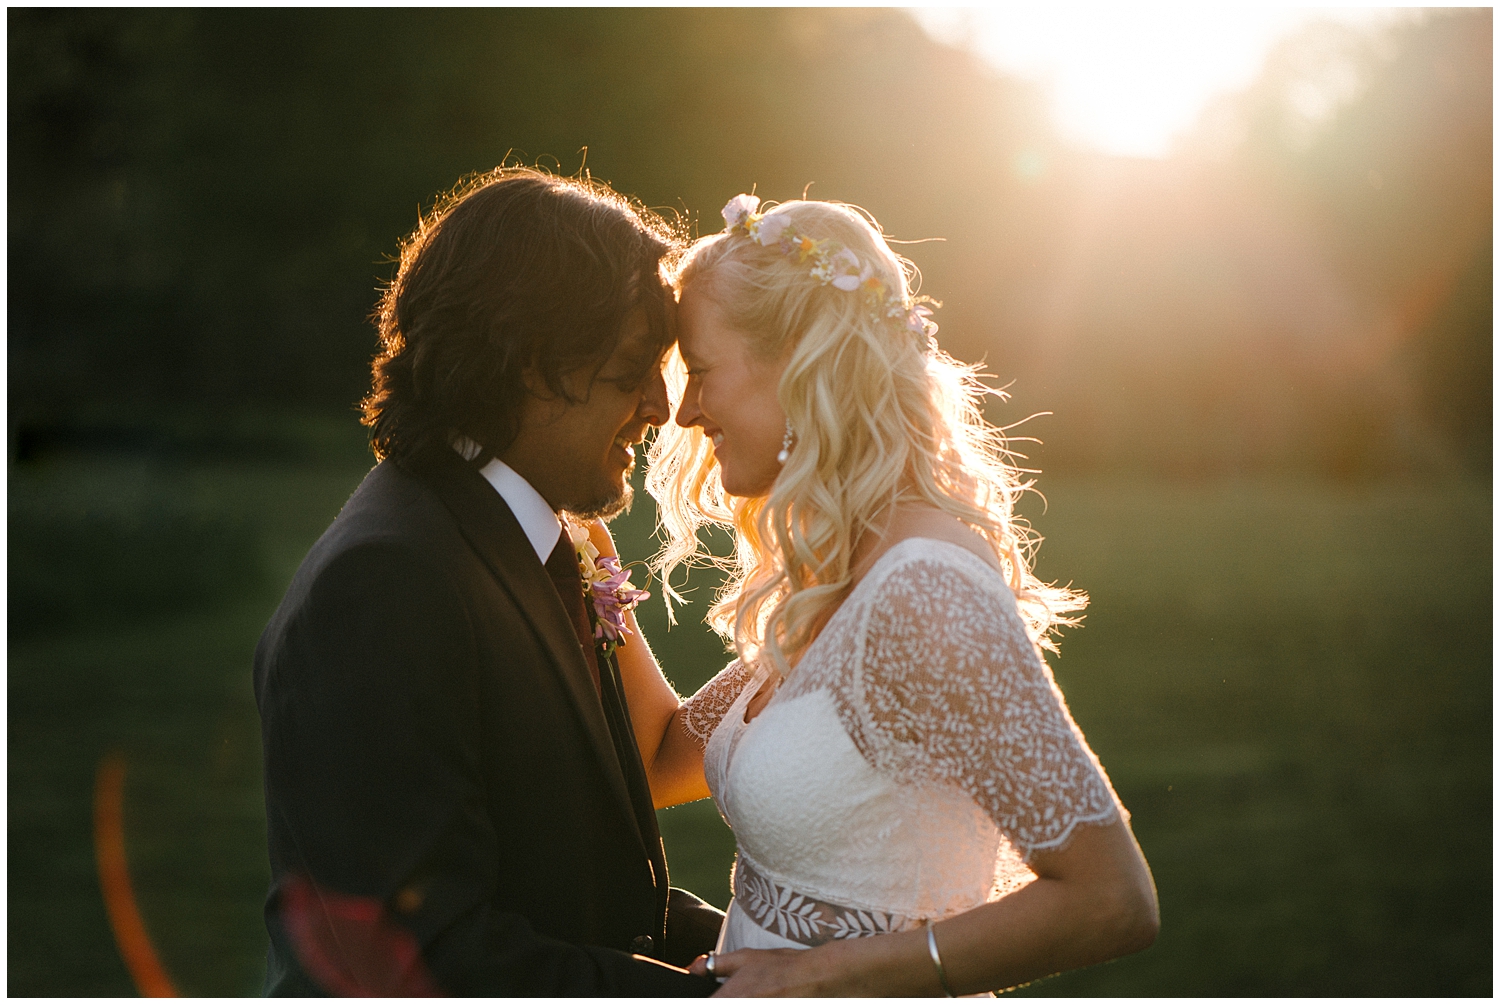 A couple during sunset during their wedding at High House Weddings in Essex. 